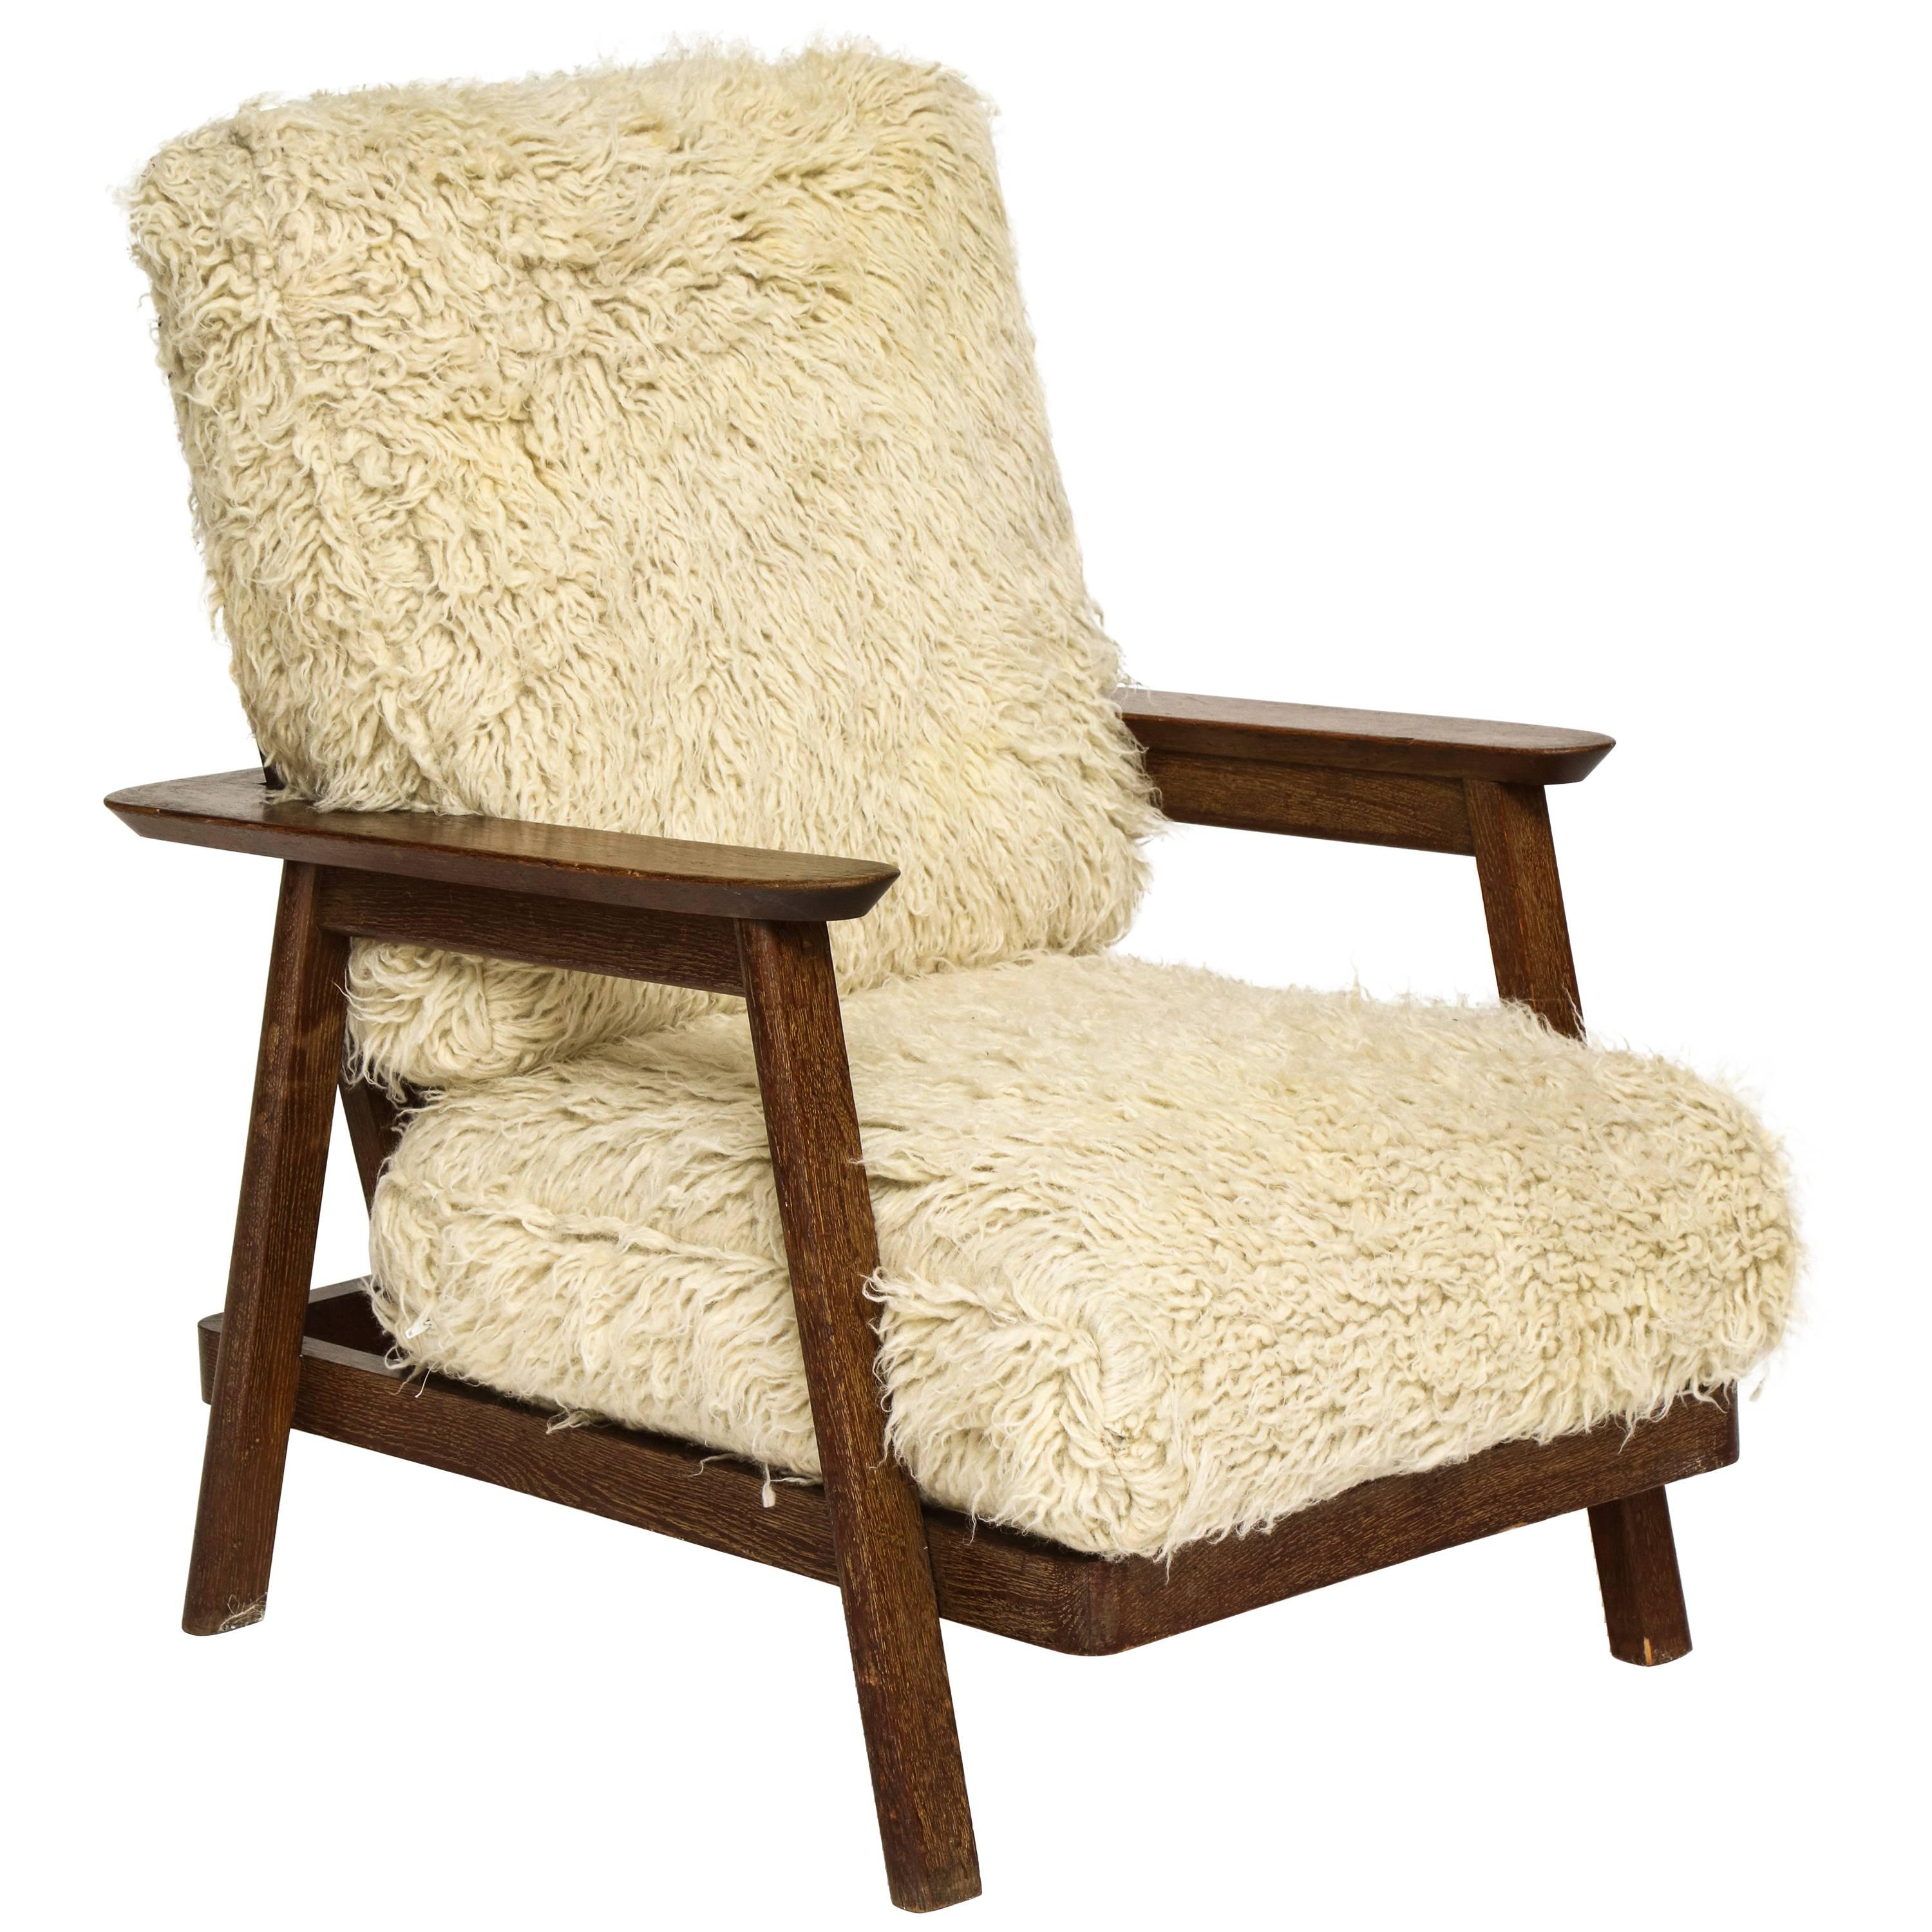 Attributed to Rene Gabriel cerused oak lounge chair Mid-Century, France, 1950.

Early 1950s example of Rene Gabriel early lounge chair. Folds down. Covered in white wool. 

Measures: 36 high,
35 deep,
27 wide.